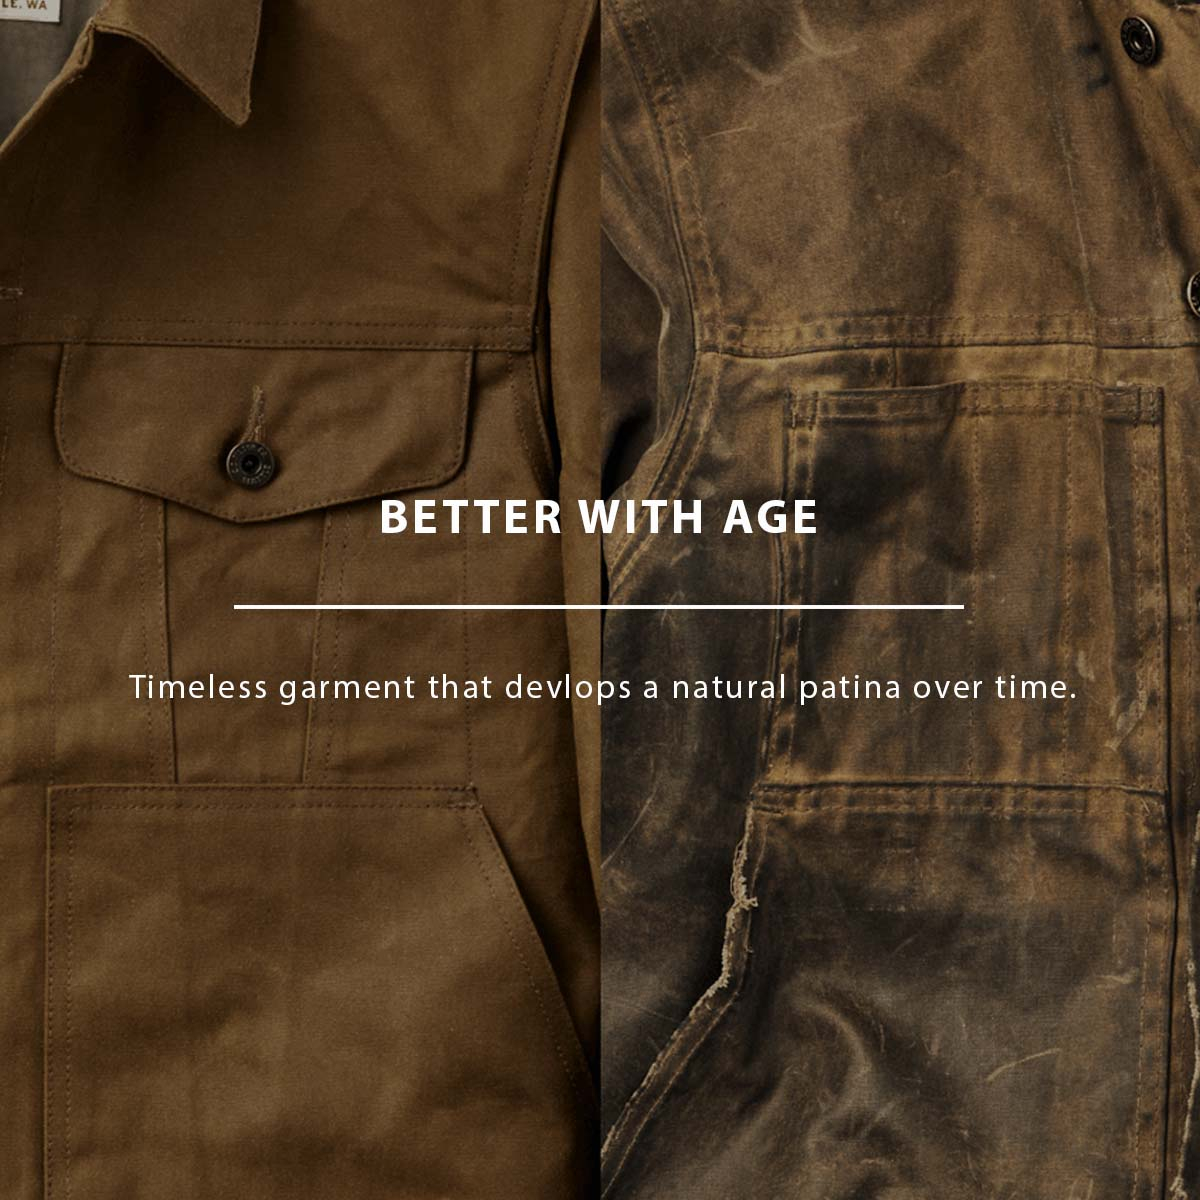 Filson Tin Cloth Short Lined Cruiser Jacket Dark Tan, better with age, timeless garment that devlops a natural patina over time